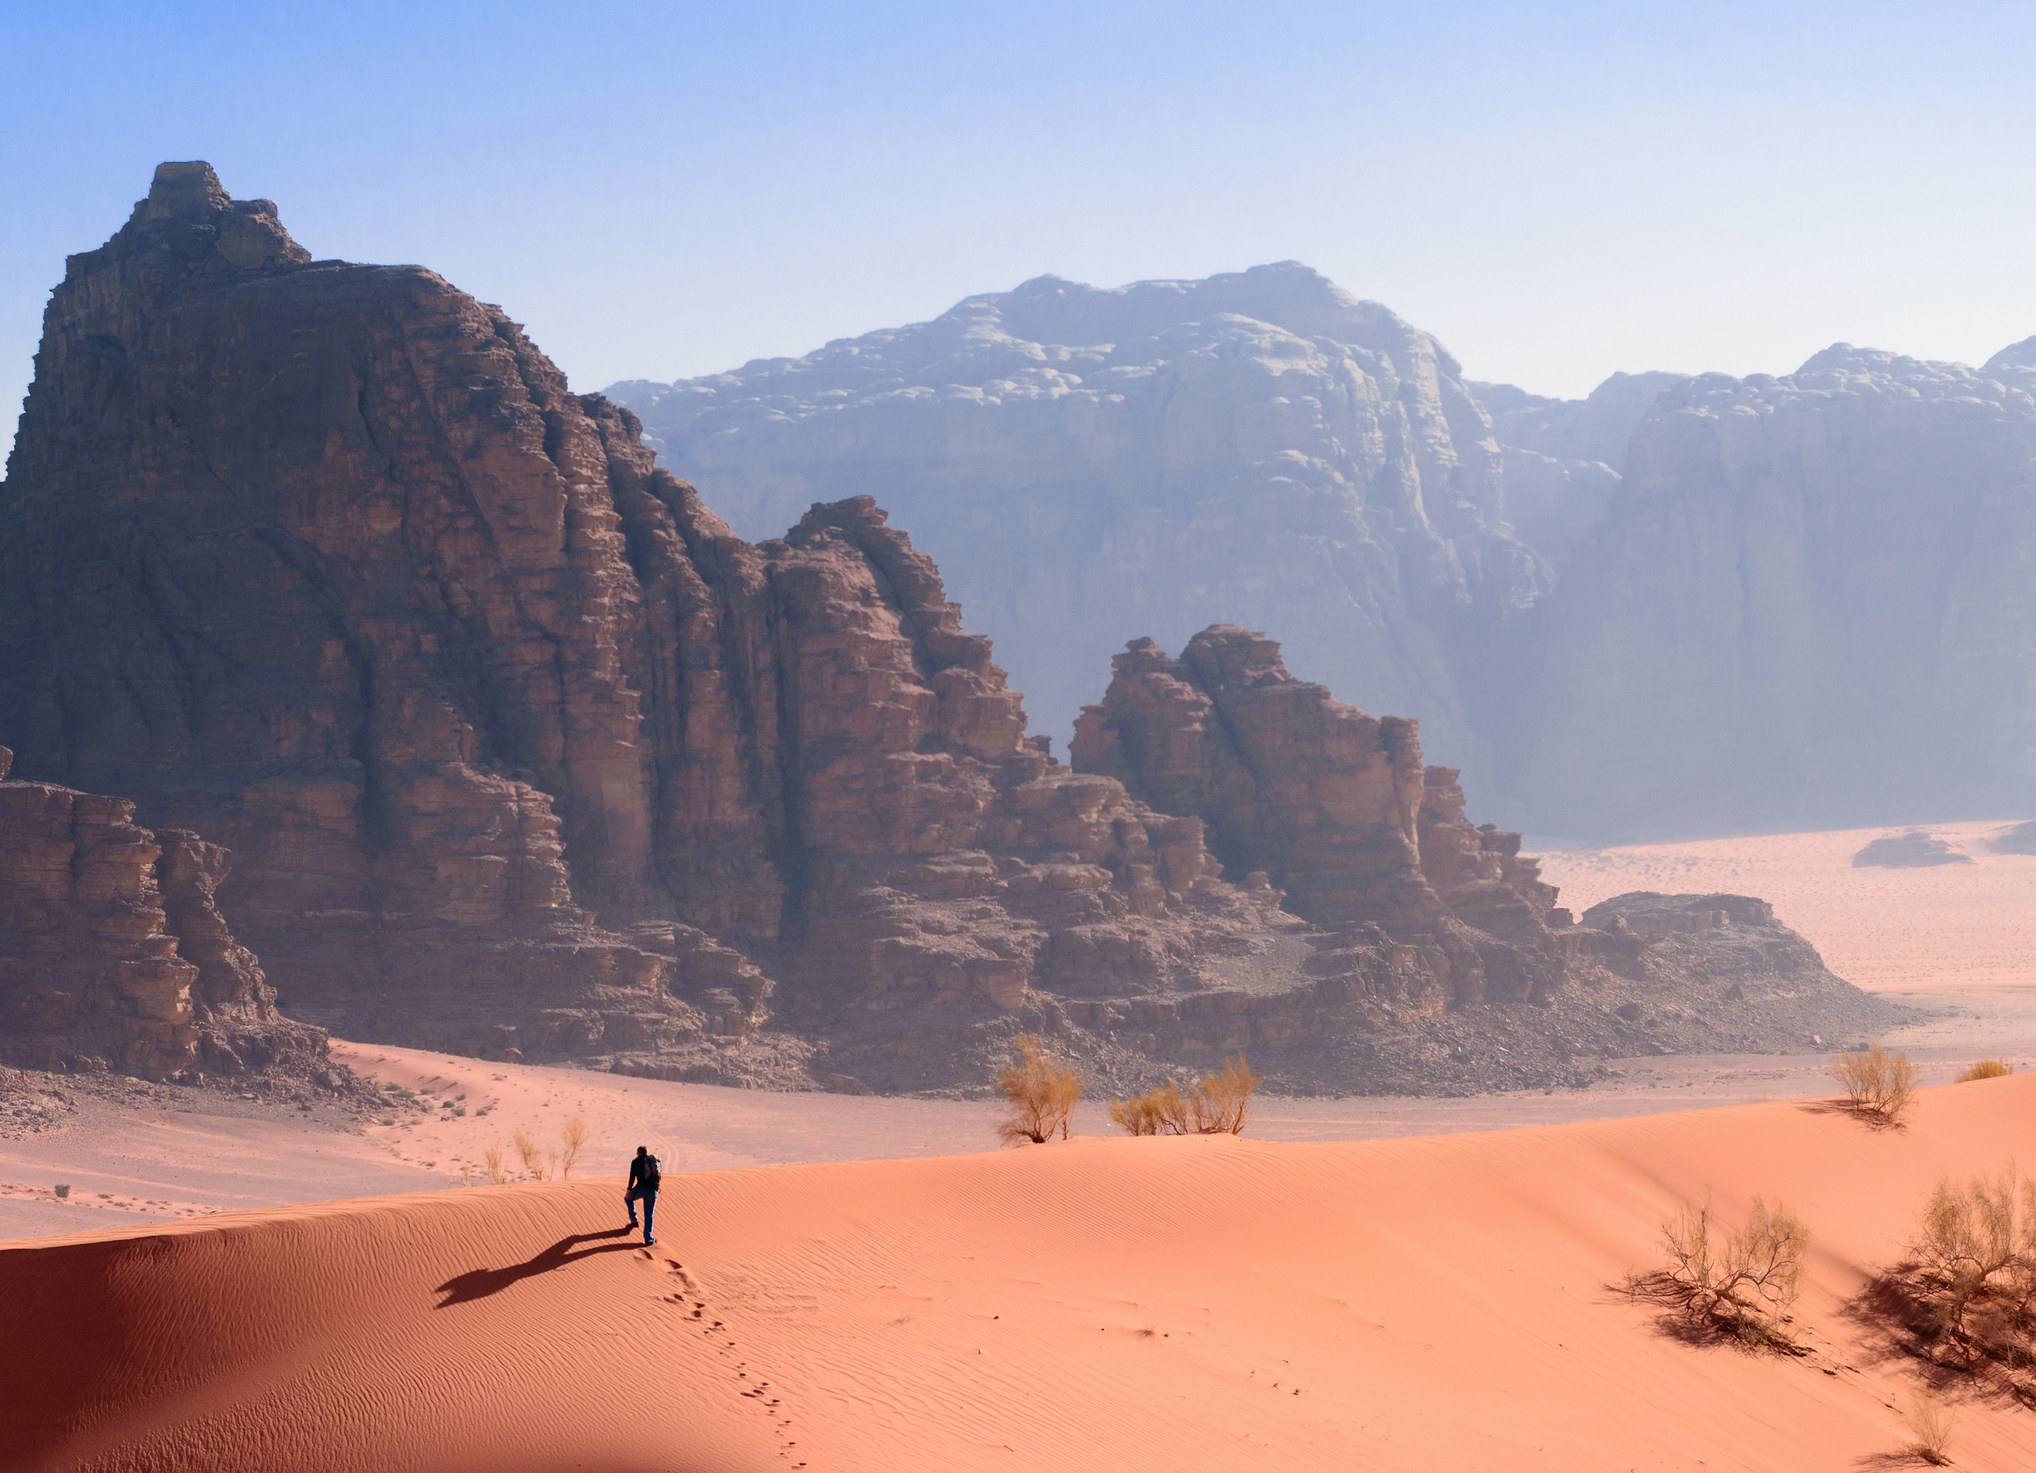 A Hiker on a Ridge in the Desert in Wadi Rum.